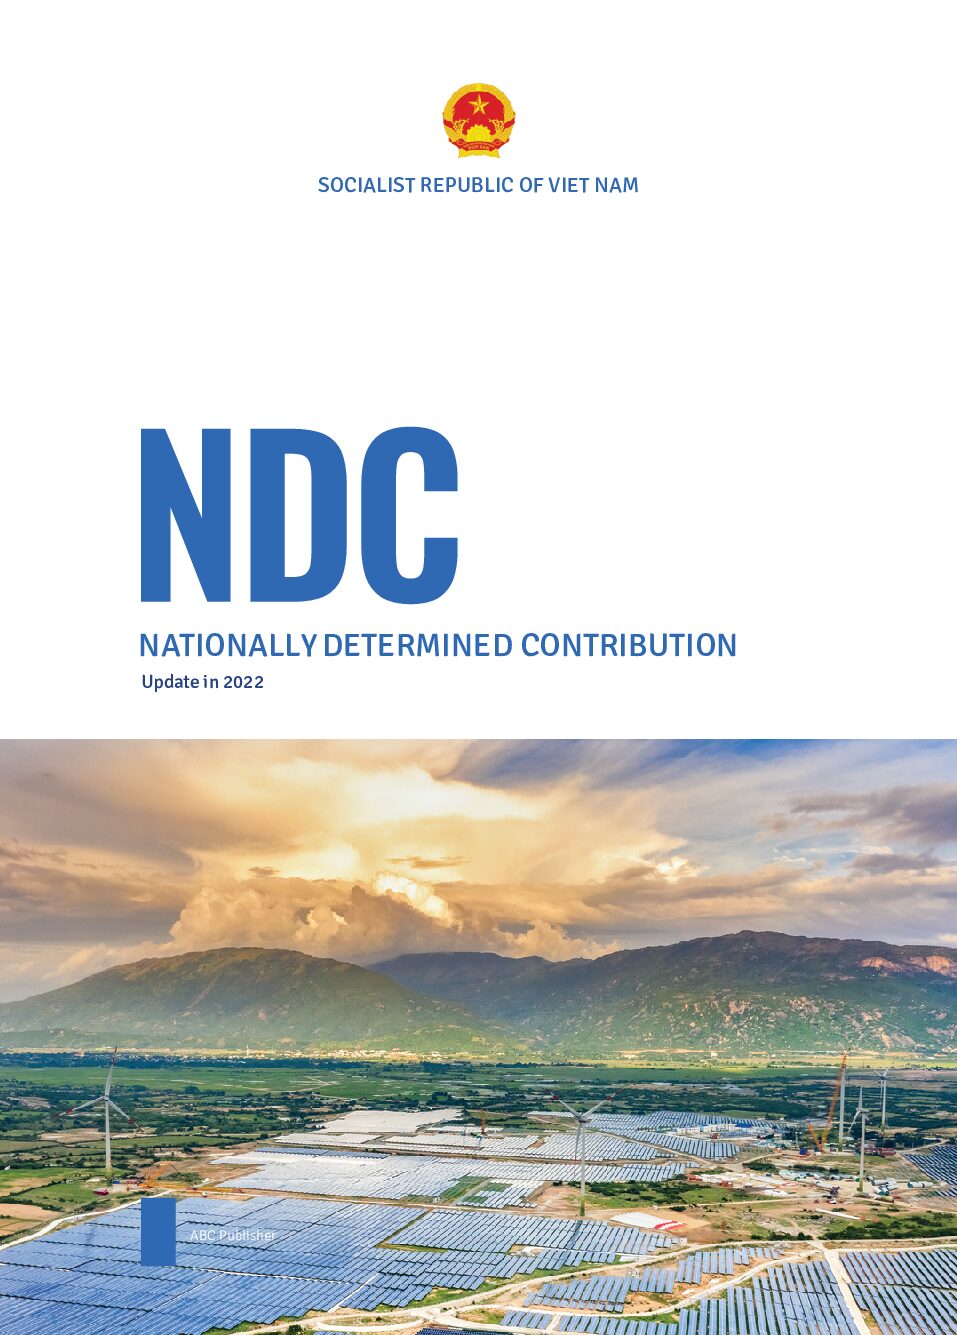 NDC NATIONALLY DETERMINED CONTRIBUTION